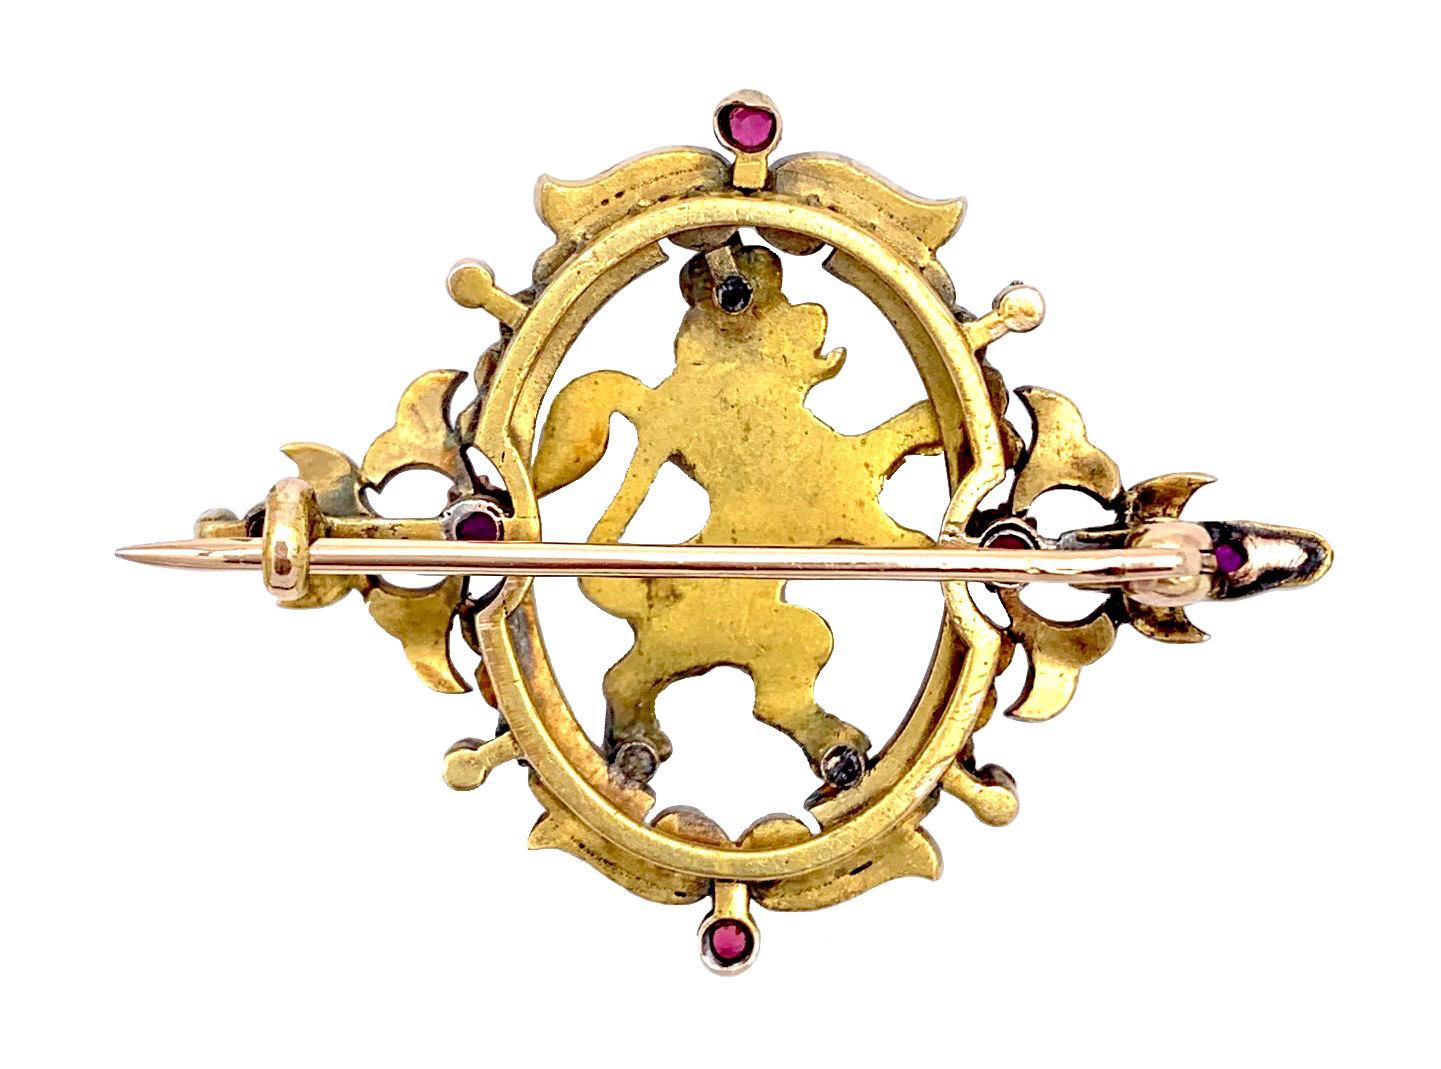 This handcrafted 14 karat gold brooch was a present given by the Bavarian Court to a loyal subject for special achievements.
The striding lion is decorated with diamonds and rubies. It is surrounded by an ornamental frame set with natural pearls and